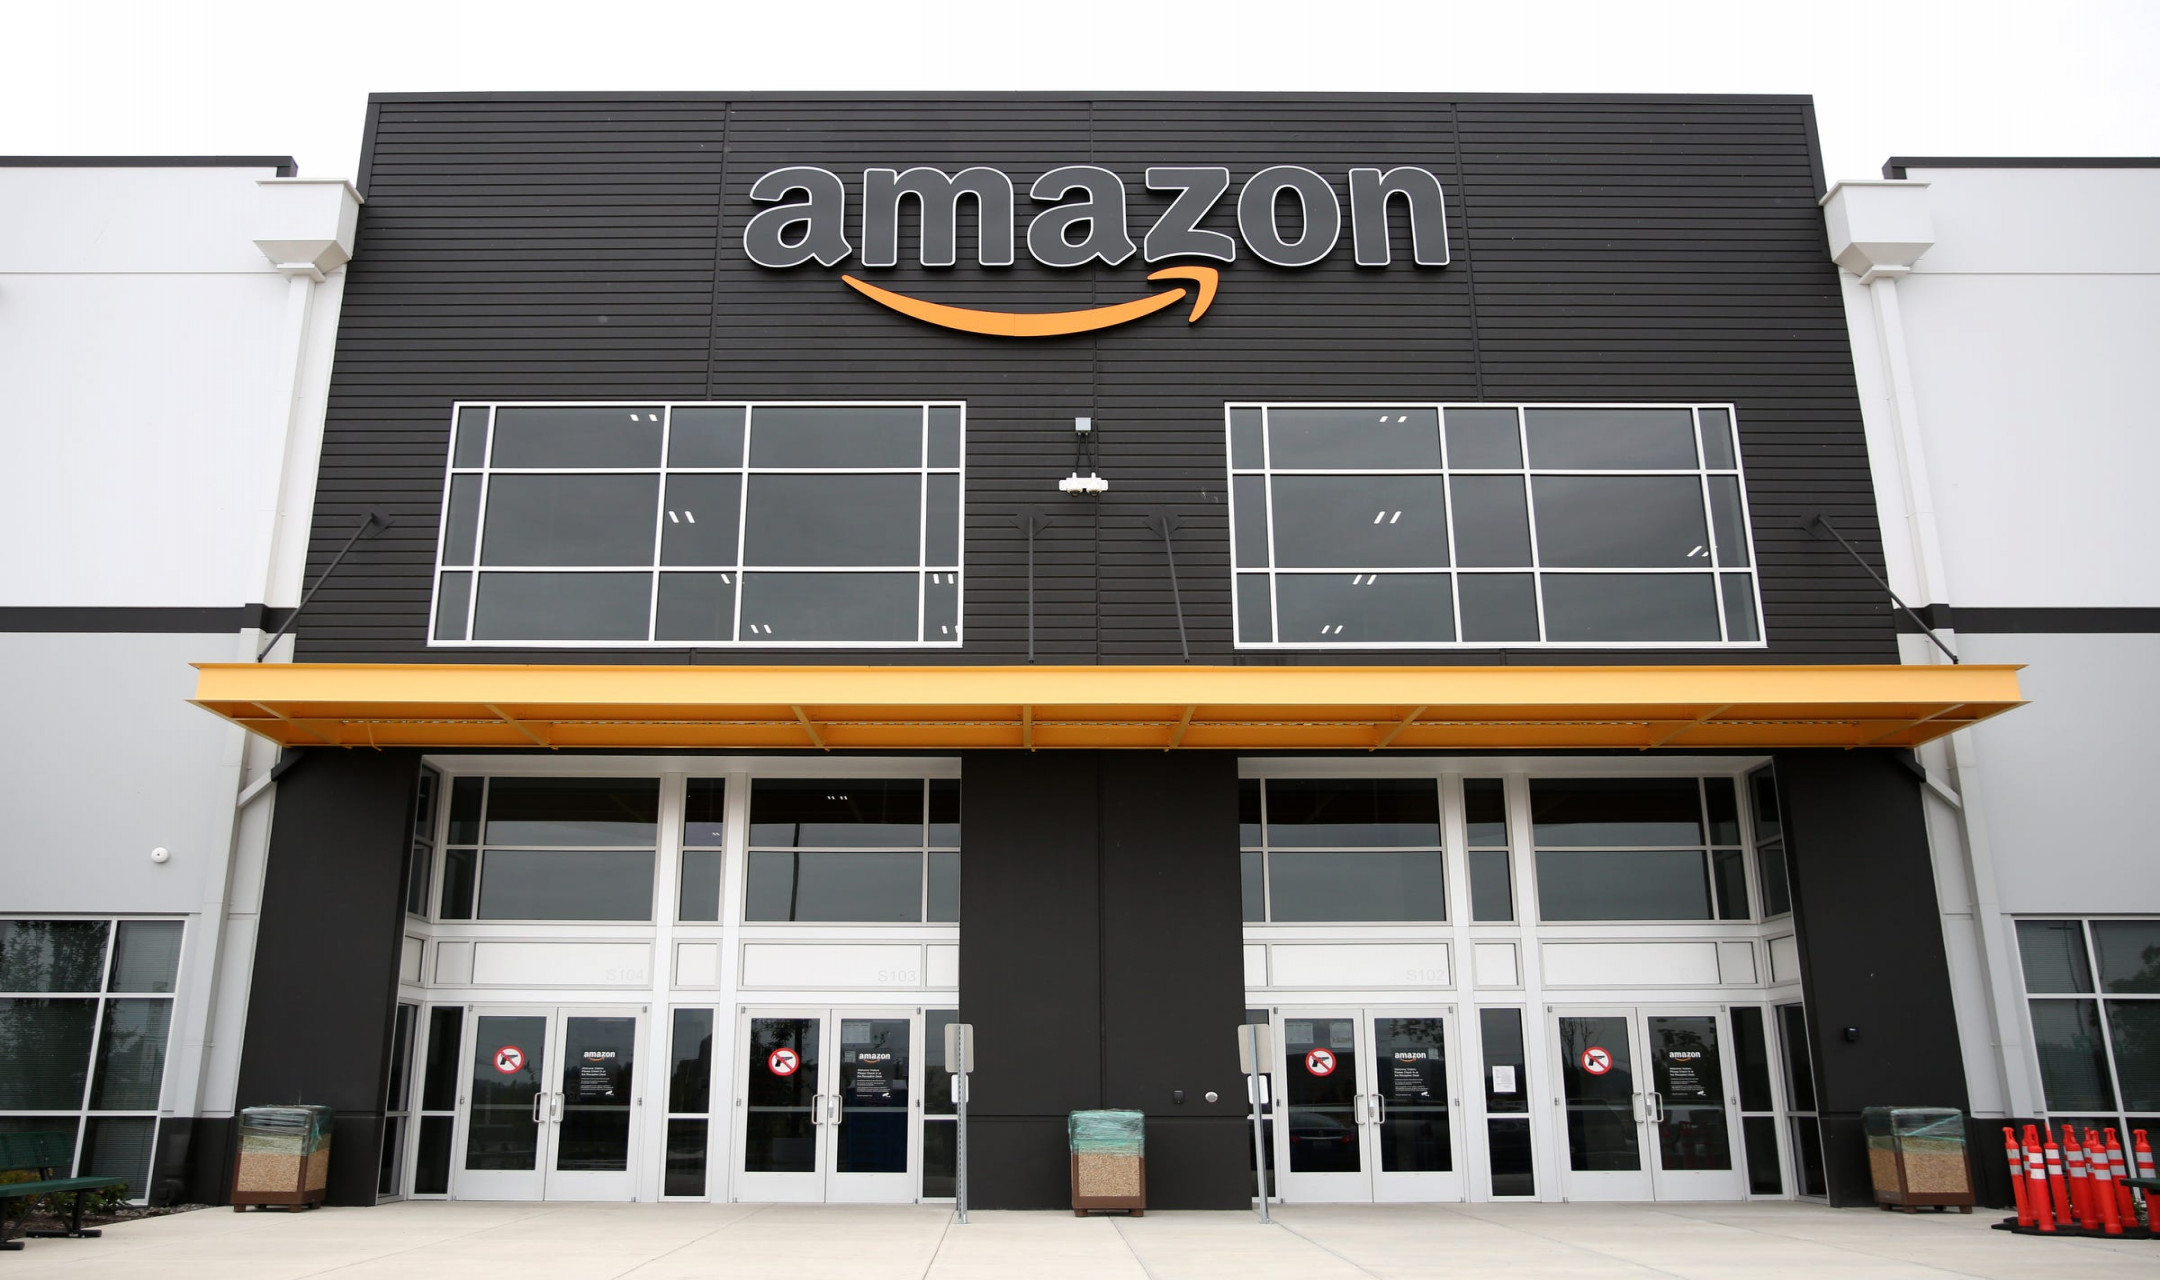 Hiring begins at the new Amazon fulfillment center in Salem